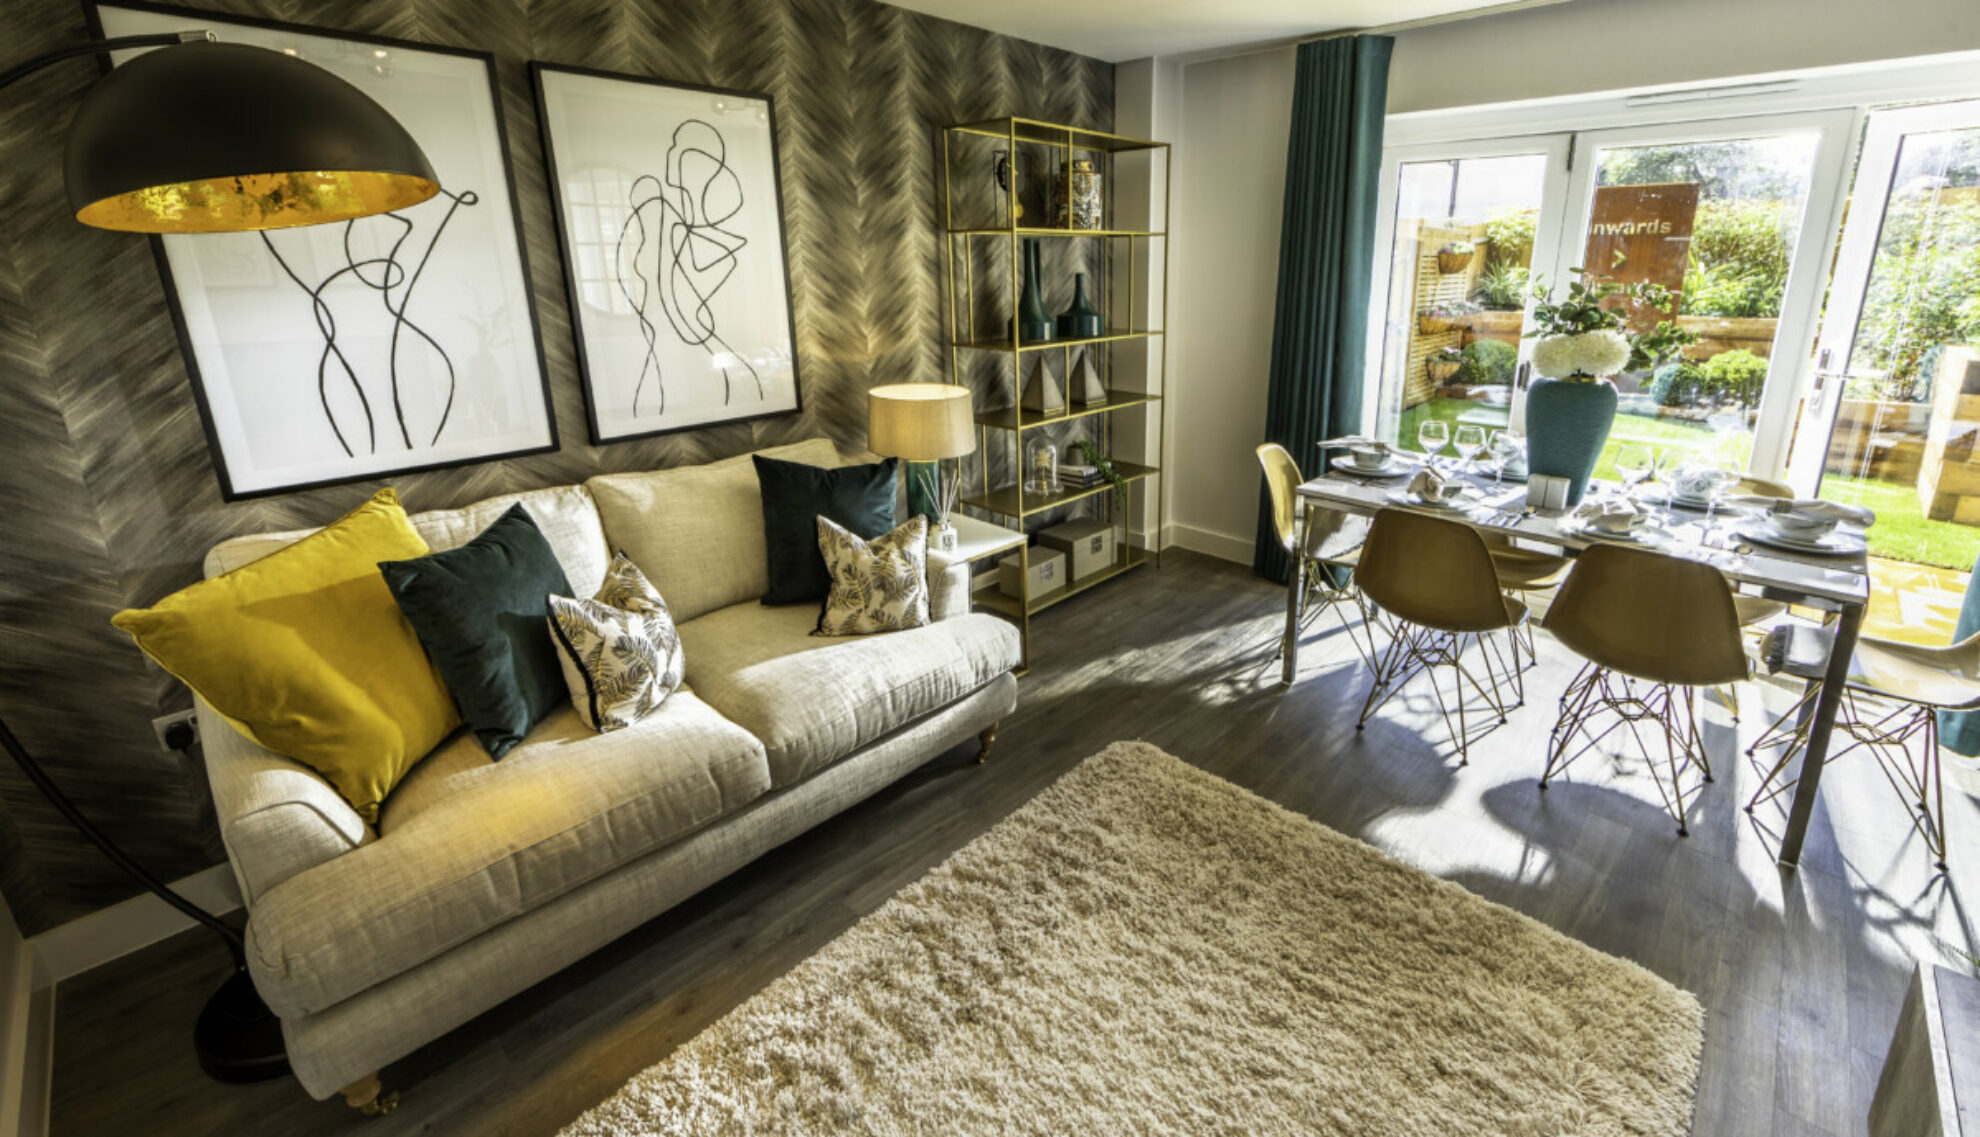 Castleward by Lovell Homes - one of the highest rated new homes developments in Derby